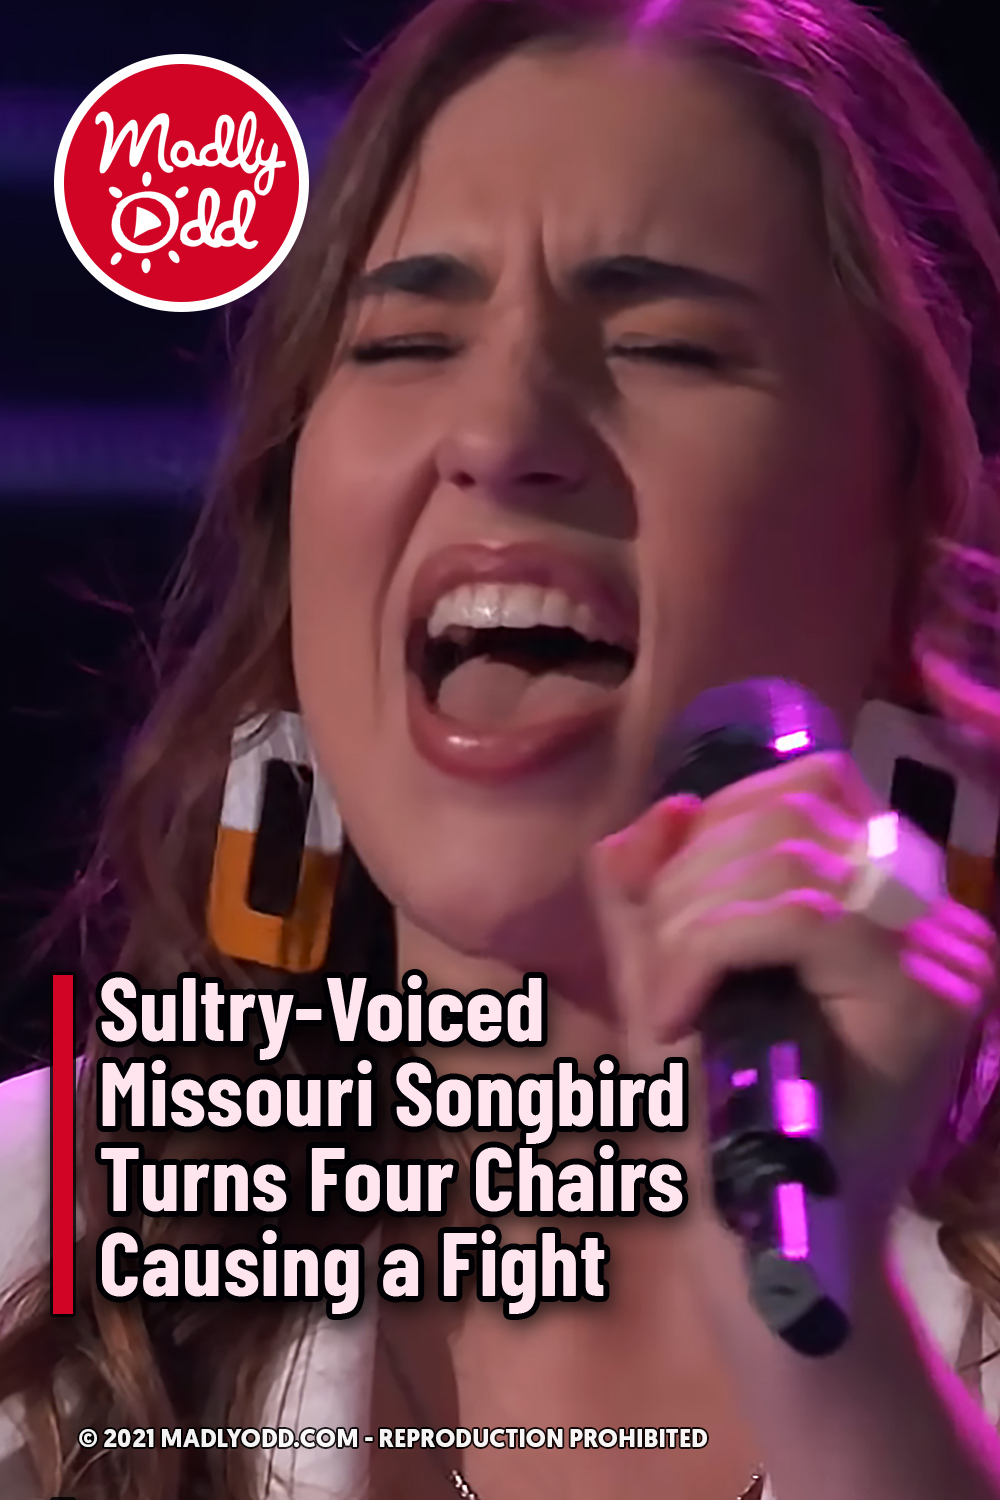 Sultry-Voiced Missouri Songbird Turns Four Chairs Causing a Fight